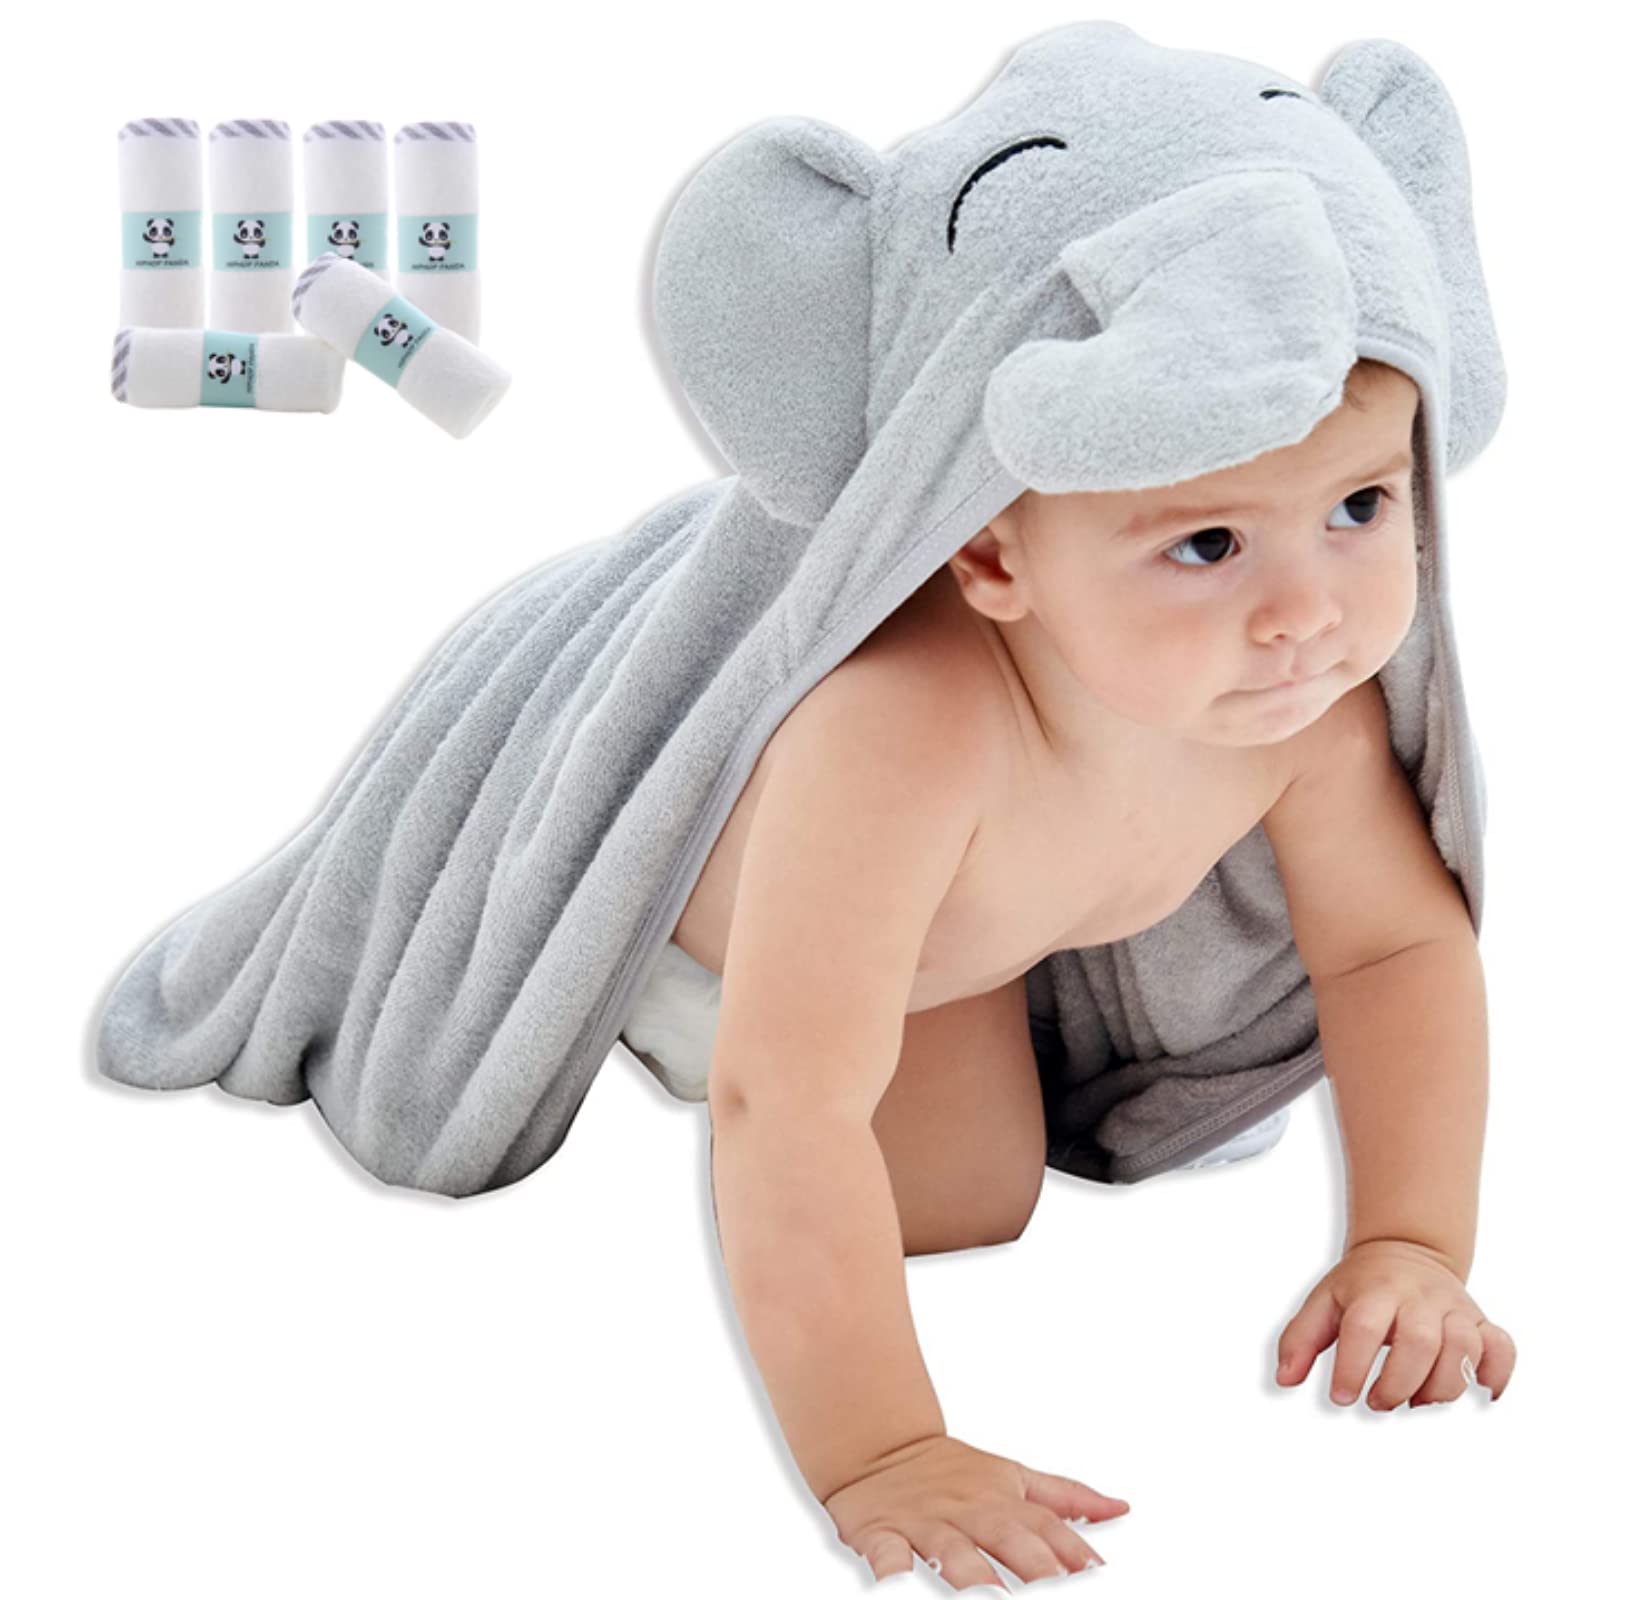 HIPHOP PANDA Bamboo Baby Washcloths, 6 Pack and Baby Hooded Towel, Grey Elephant, 30 x 30 Inch